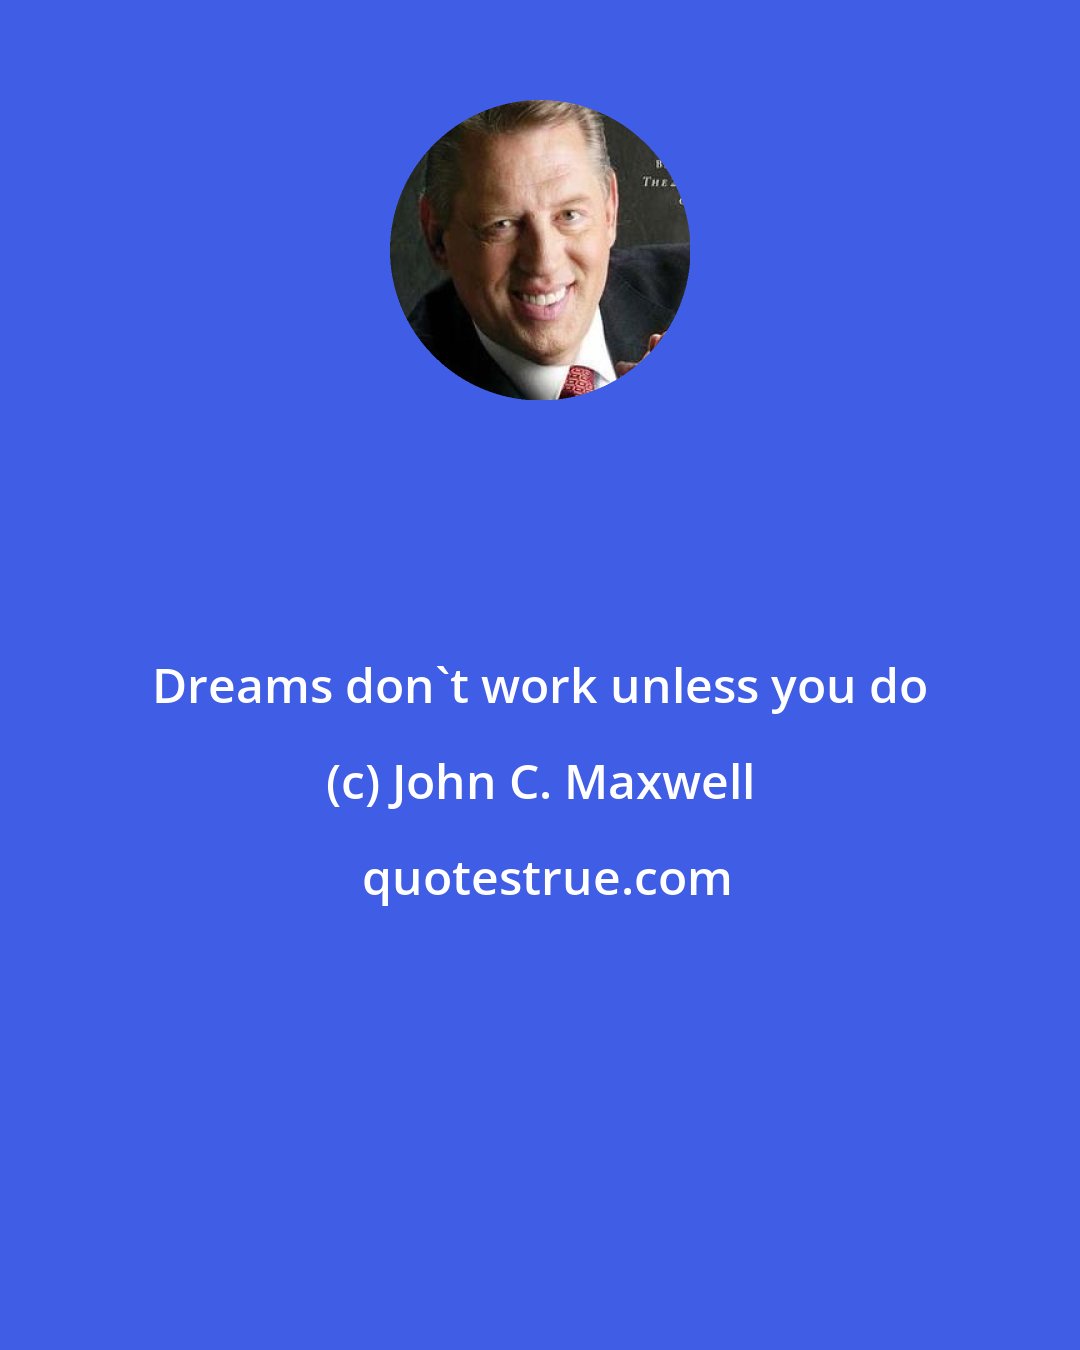 John C. Maxwell: Dreams don't work unless you do